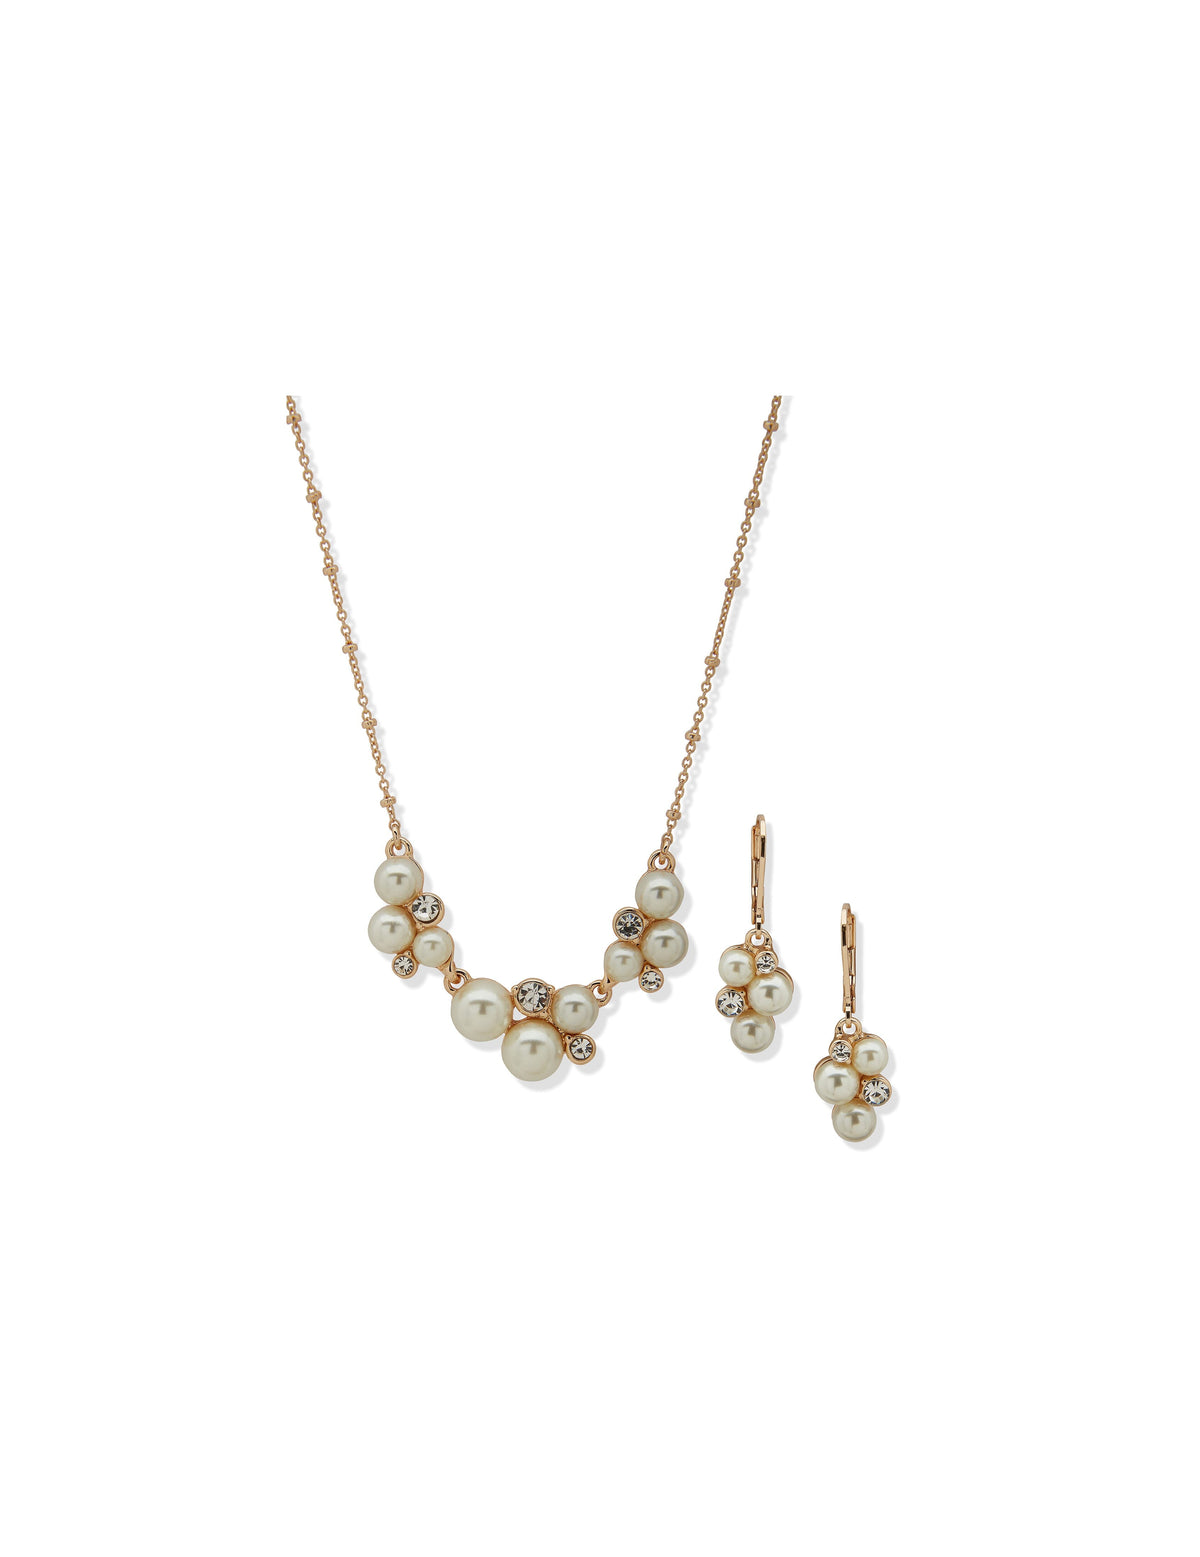 Anne Klein Gold Tone Pearl Cluster Necklace and Earring Set